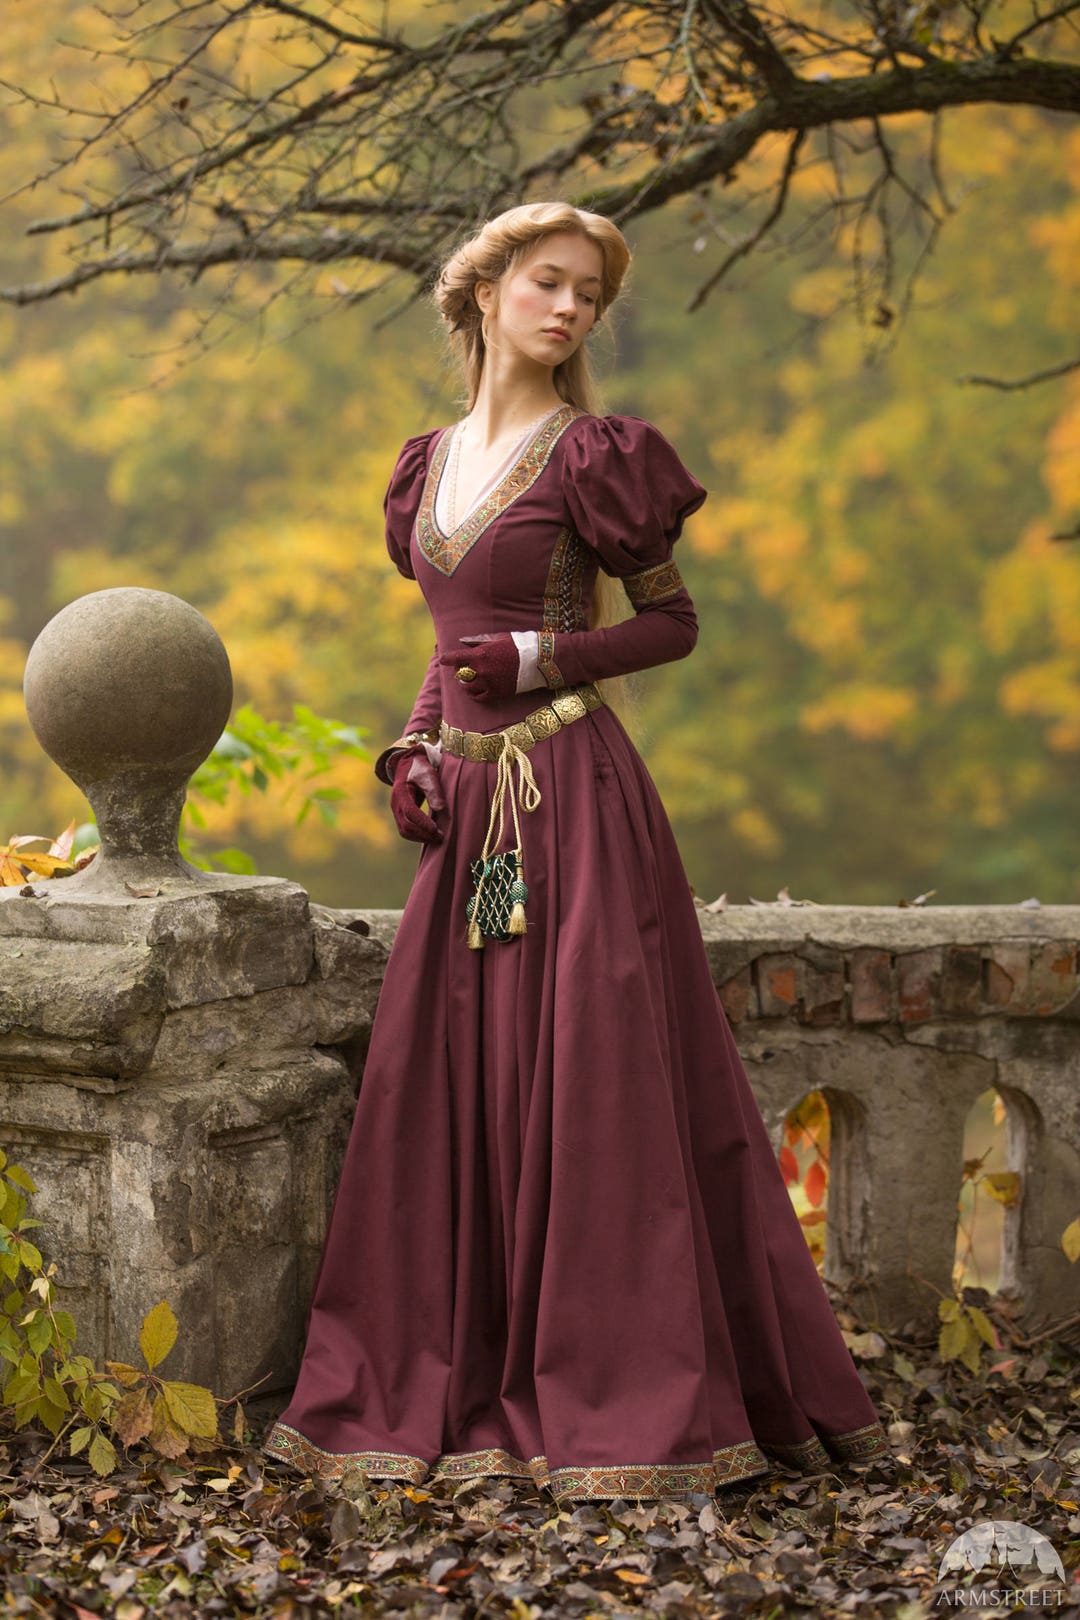 Armstreet Medieval Fantasy Dress princess in Exile Outfit Renaissance ...